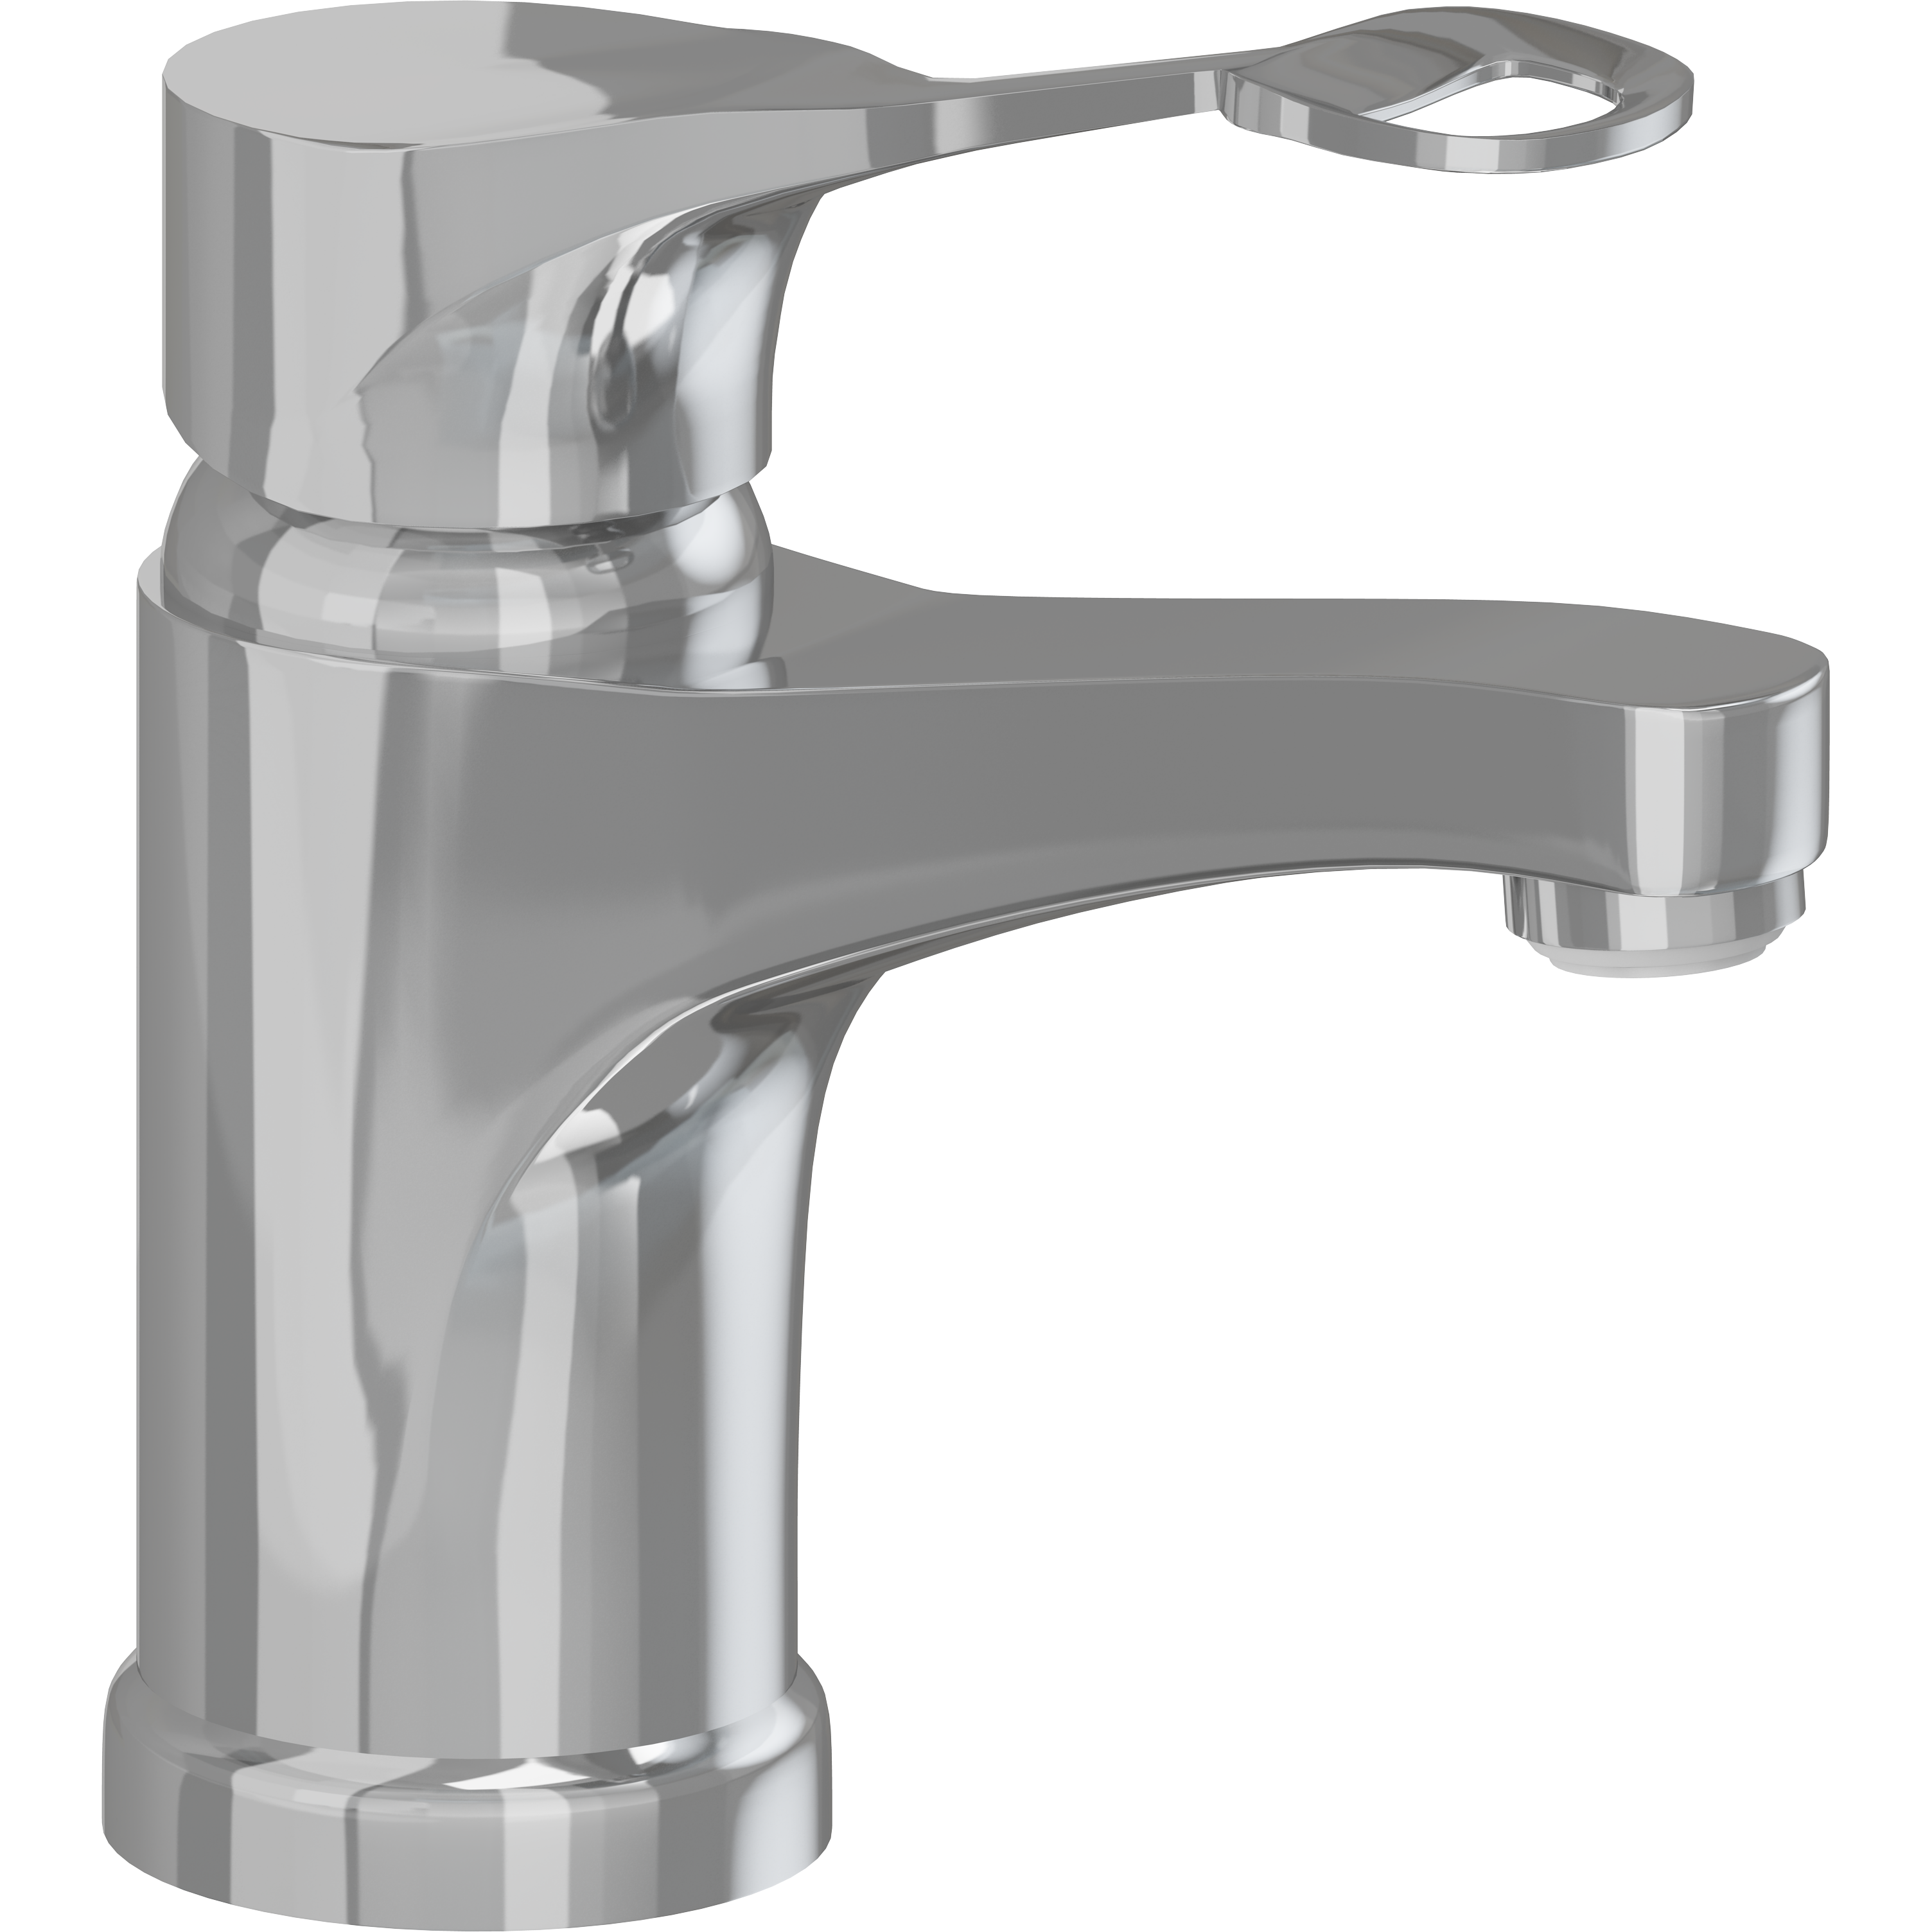 Mixer tap with long rotatable spout and ring-shaped operating lever